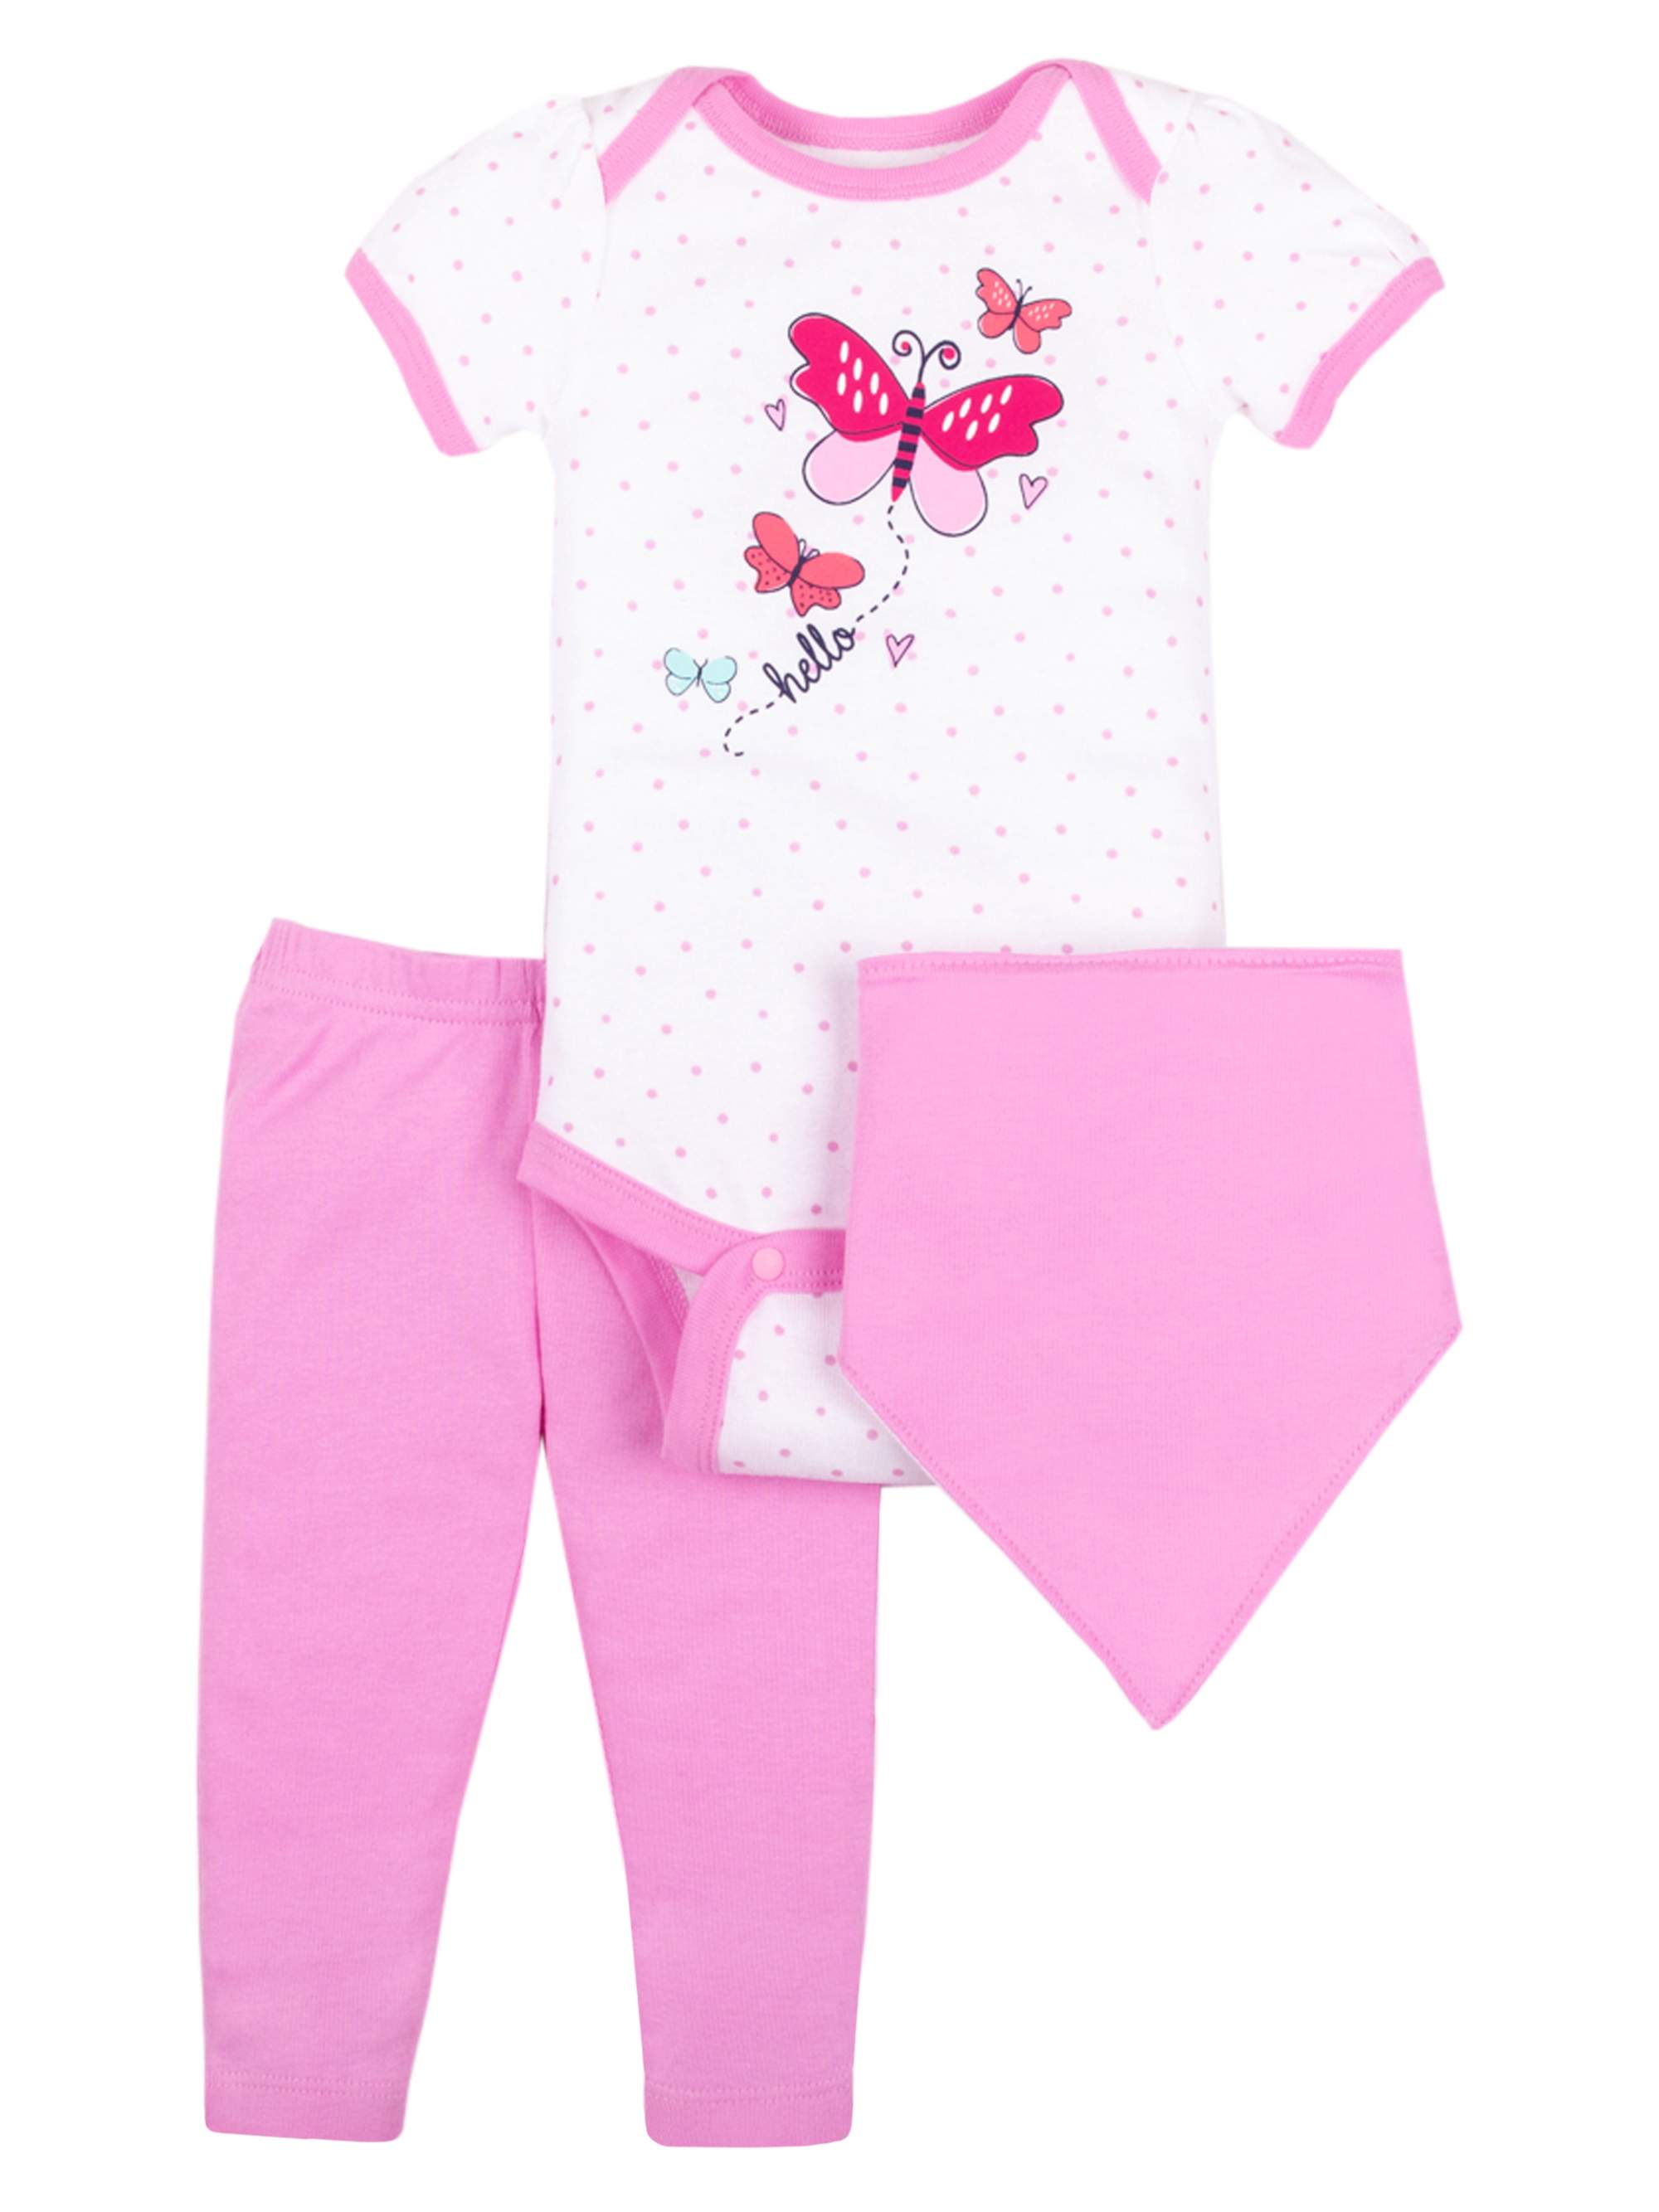 Little Star Organic Baby GIrl 3Pc Outfit Set, Size NB-24M - image 1 of 5